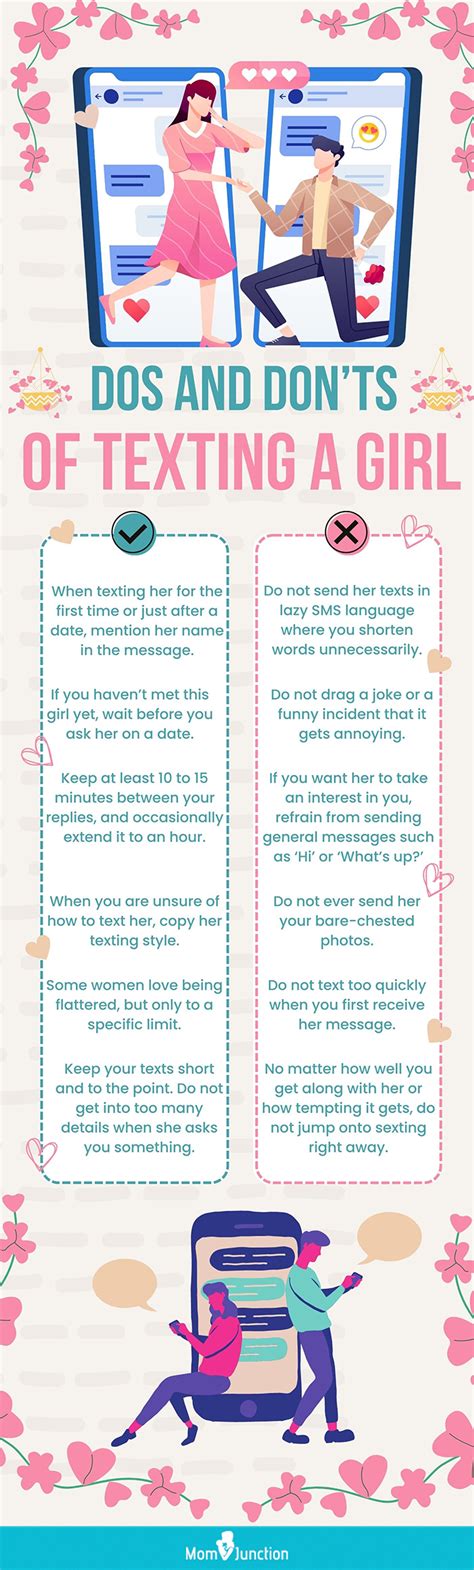 How often should I text a girl?